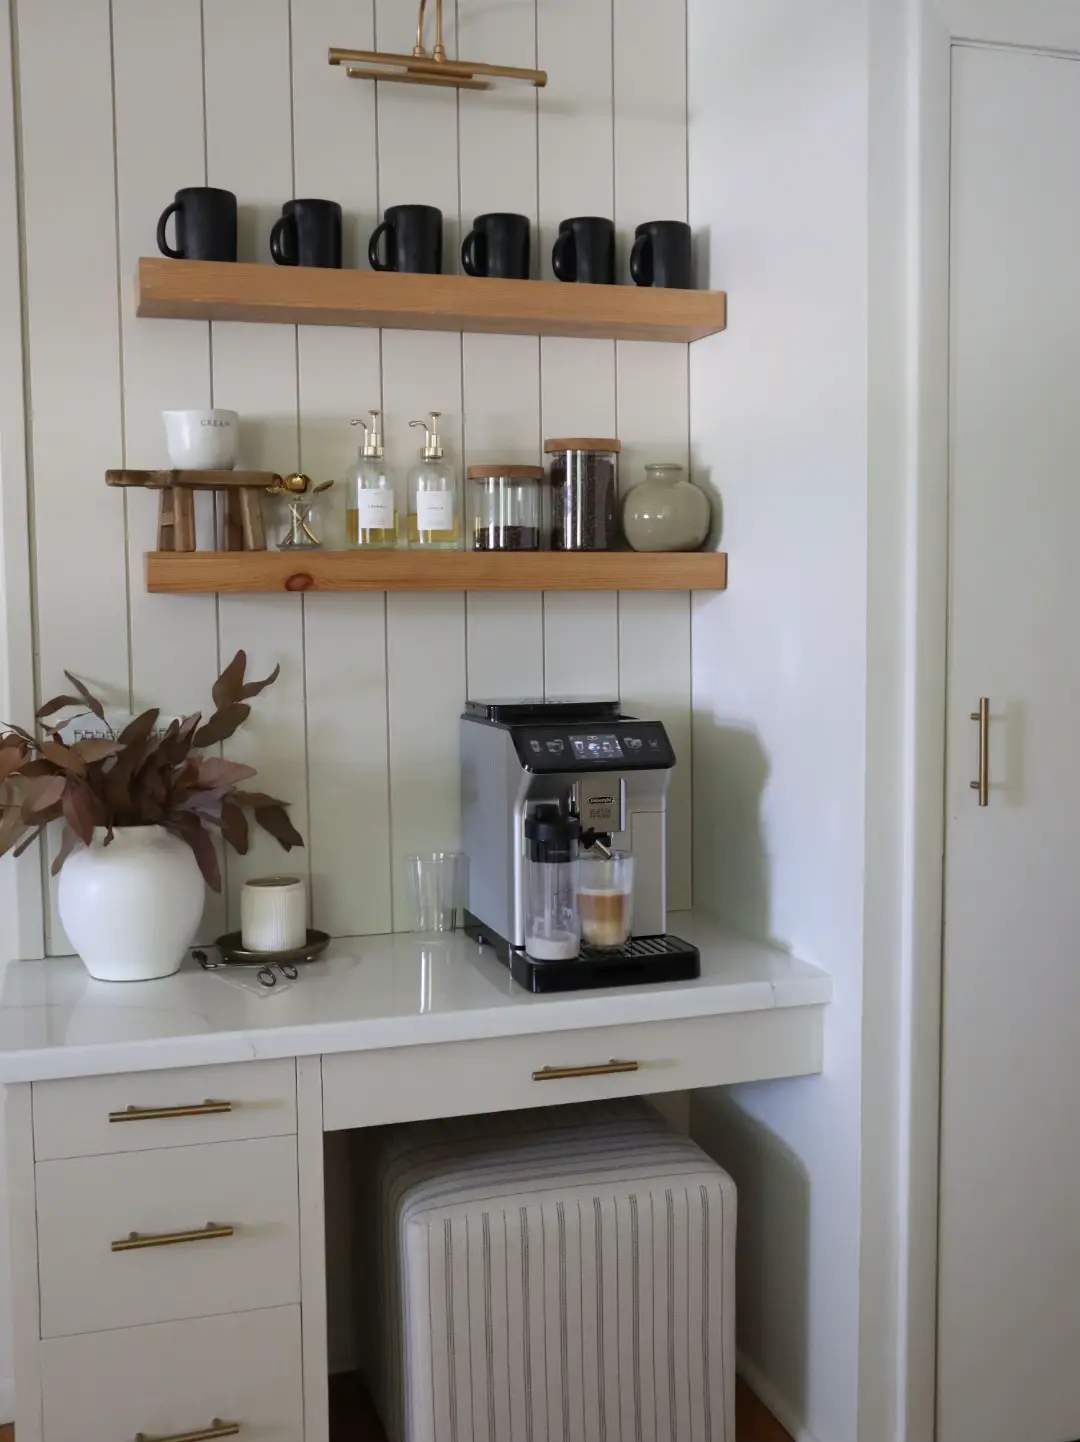 I created a COFFEE AND BREAKFAST CORNER in MY KITCHEN easily by upgrading  an IKEA shelving unit ☕🥐🌞 